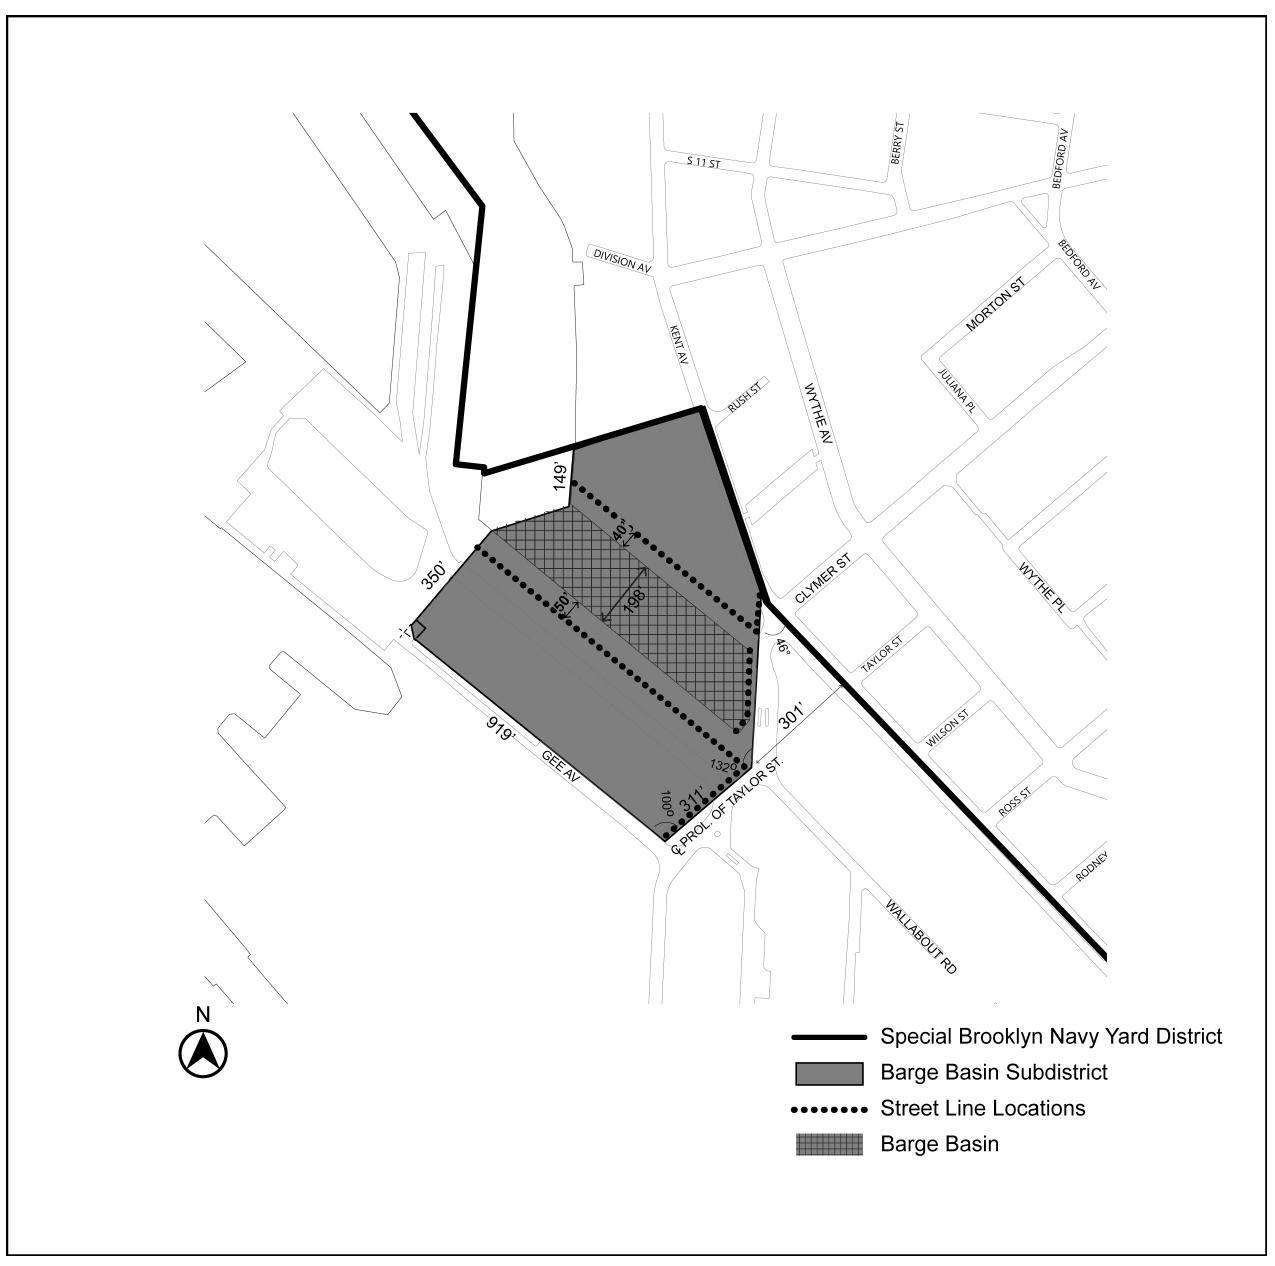 Zoning Resolutions Chapter 4: Special Brooklyn Navy Yard District APPENDIX A.4